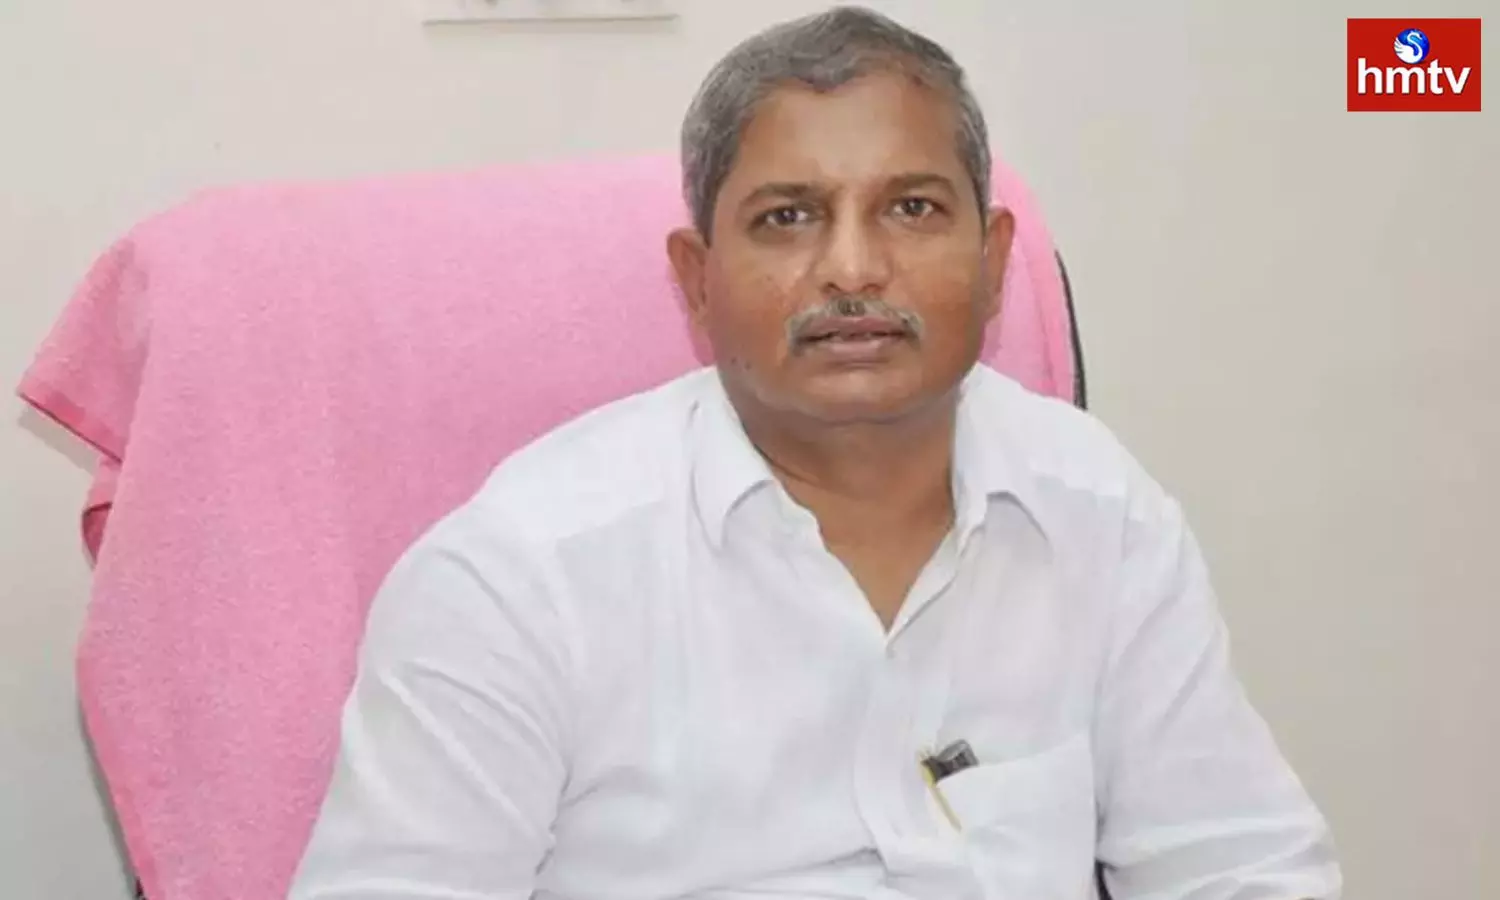 TRS Tickets For Sittings Only Says Ramesh Babu